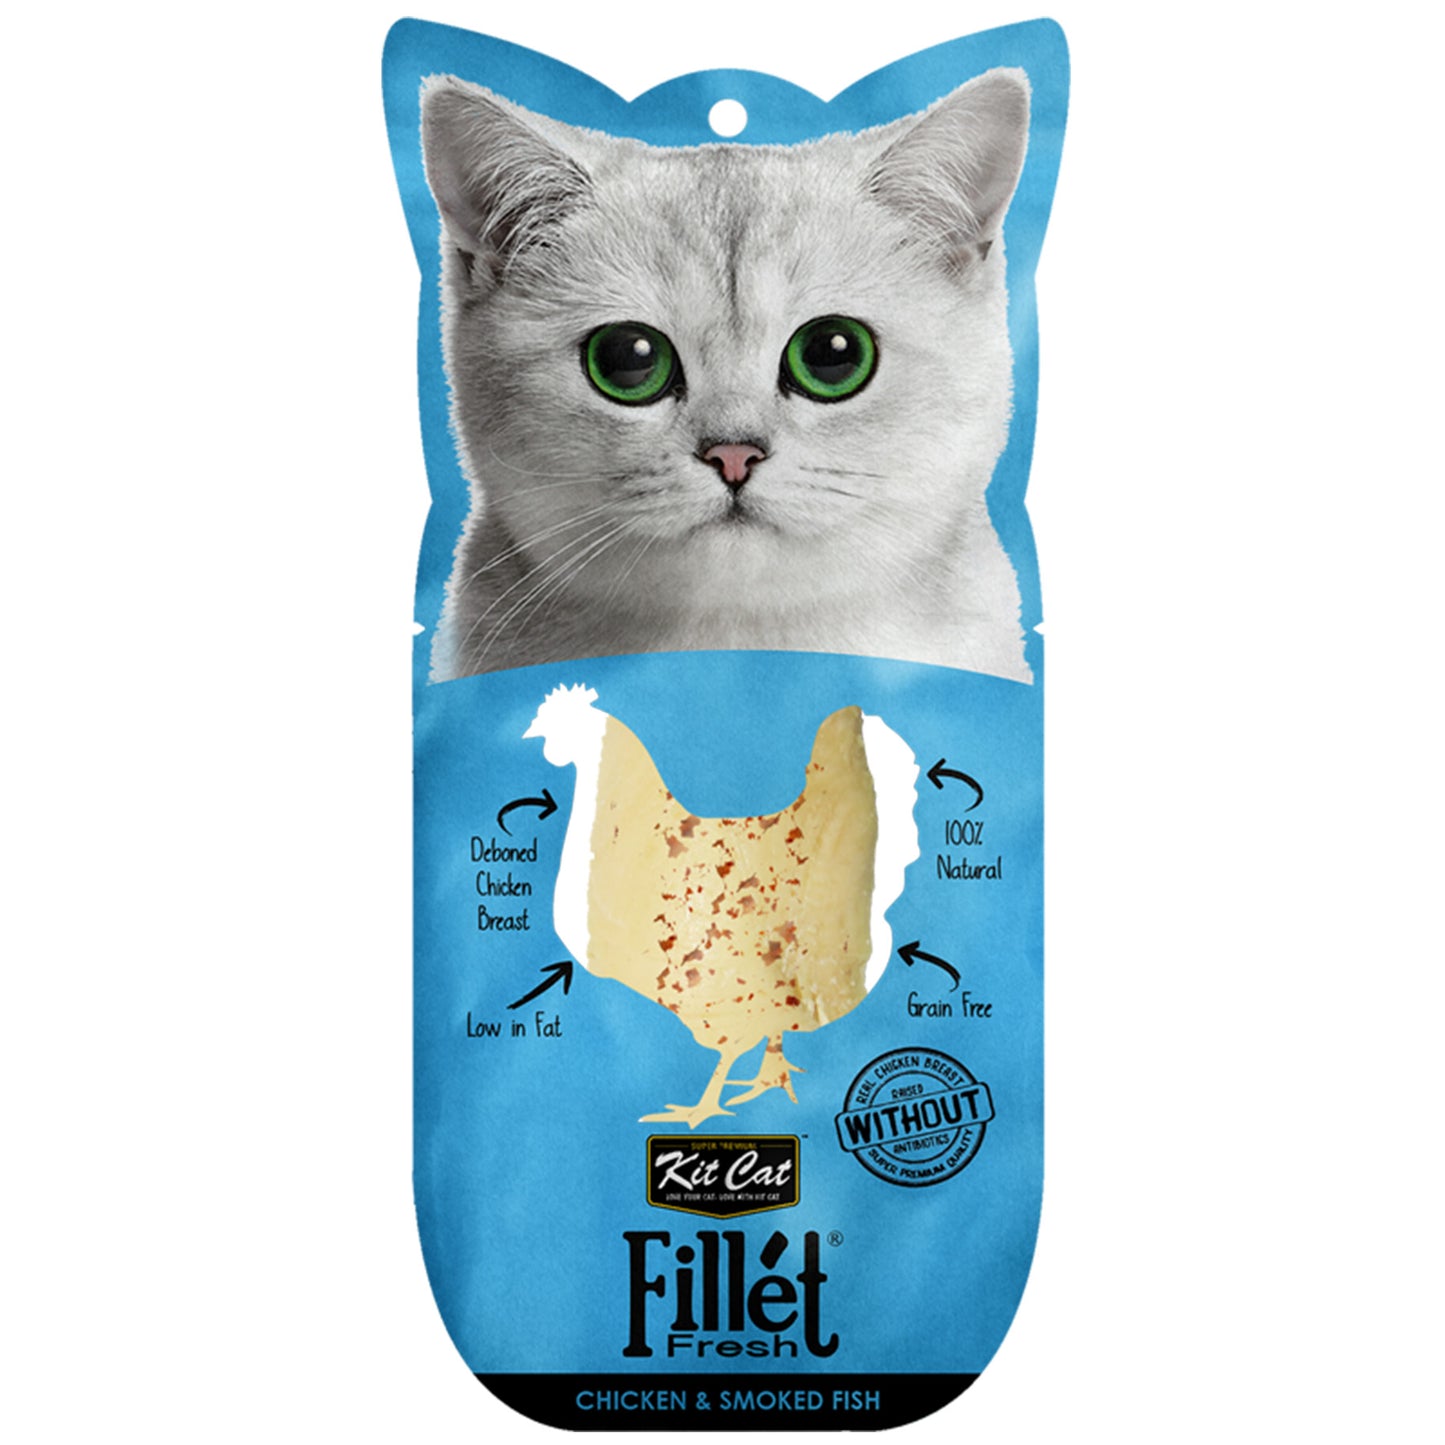 [5 for $10.50] Kit Cat Fillet Fresh Chicken & Smoked Fish Cat Treat